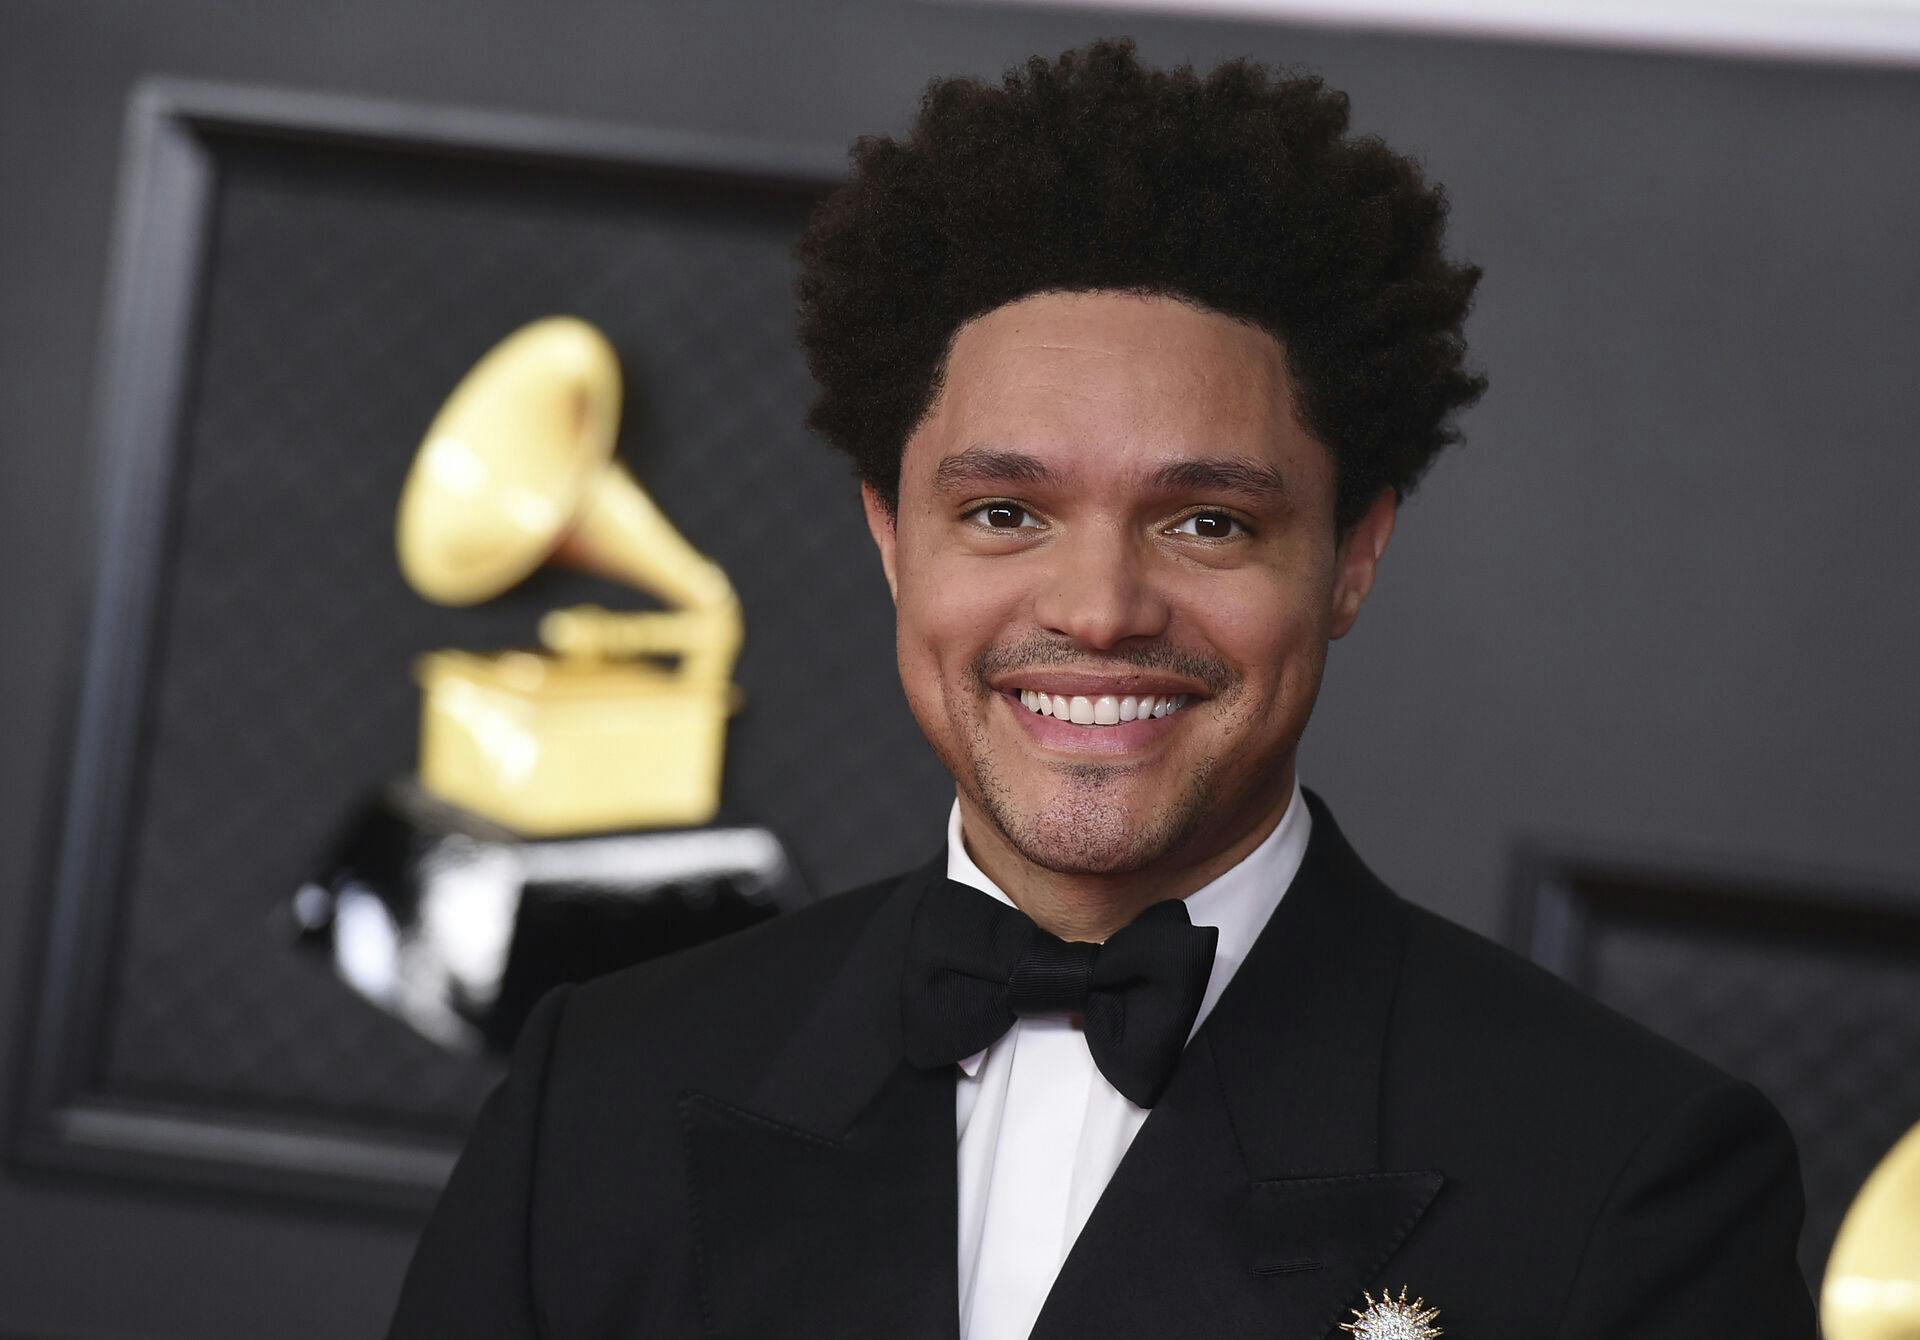 FILE - Trevor Noah appears at the 63rd annual Grammy Awards in Los Angeles on March 14, 2021. Noah will host the 66th annual Grammy Awards, Sunday, February 4 at the Crypto.com Arena in Los Angeles. (Photo by Jordan Strauss/Invision/AP, File)